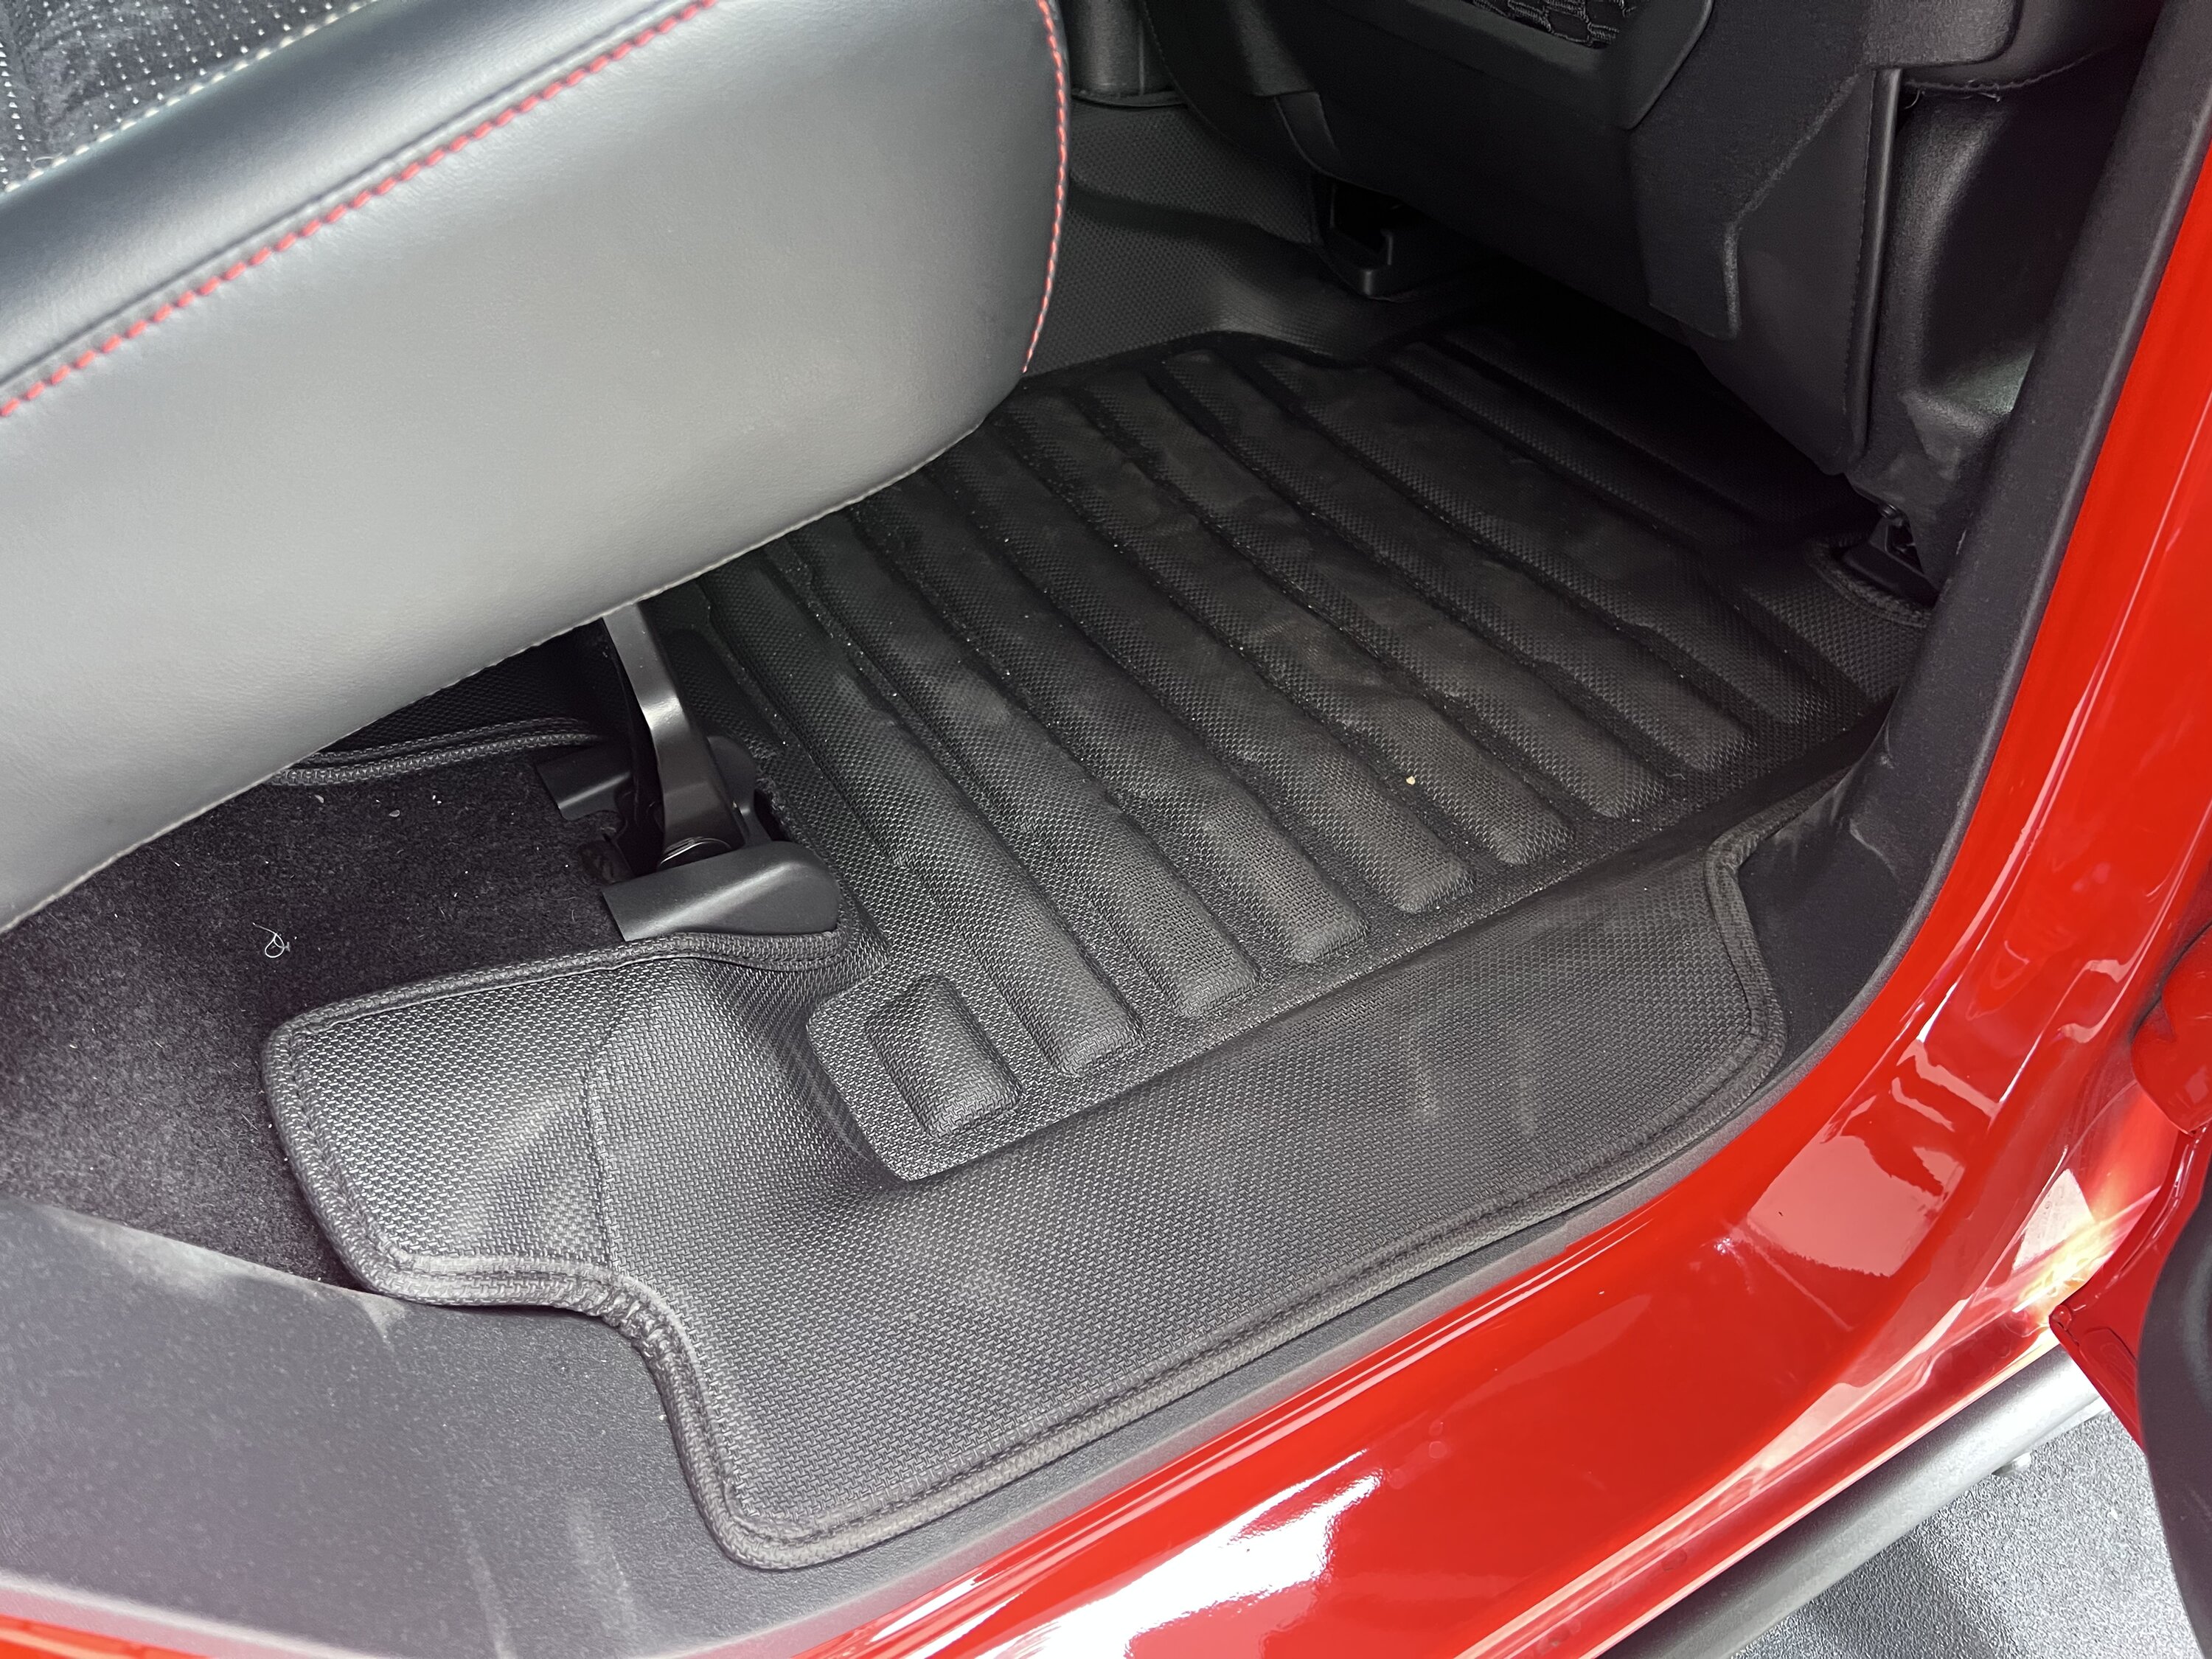 Ford Bronco TuxMat Floor Mats installed on my Bronco Raptor - These things are legit! 6EB4909D-D6BD-4D11-B086-9A63B156BE6B